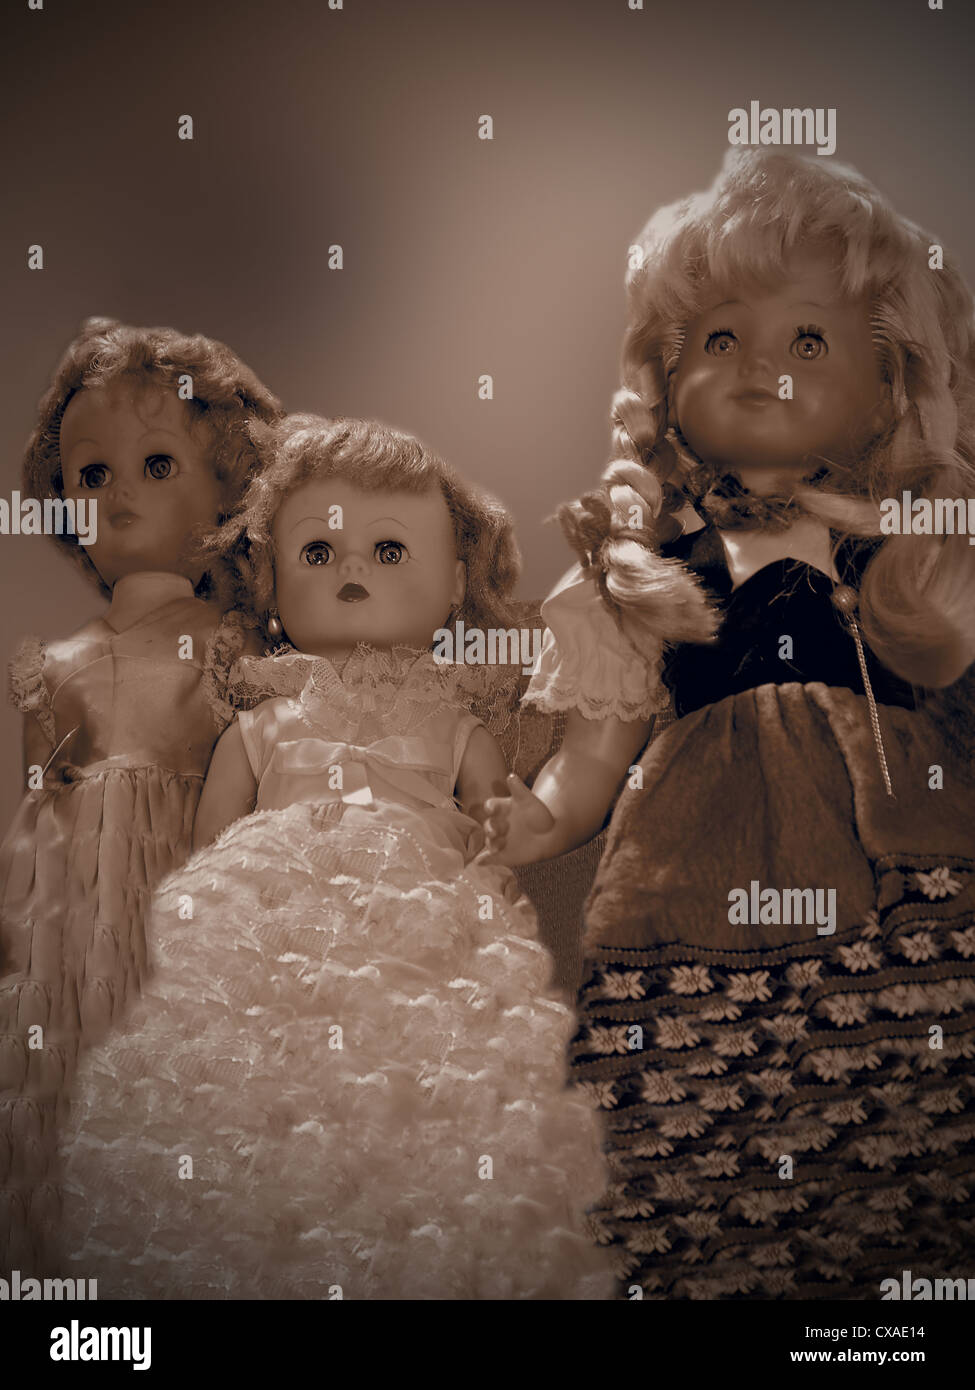 A trio of beautiful vintage dolls in sepia tone stands above the viewer, against a soft background brown and cream background. Stock Photo